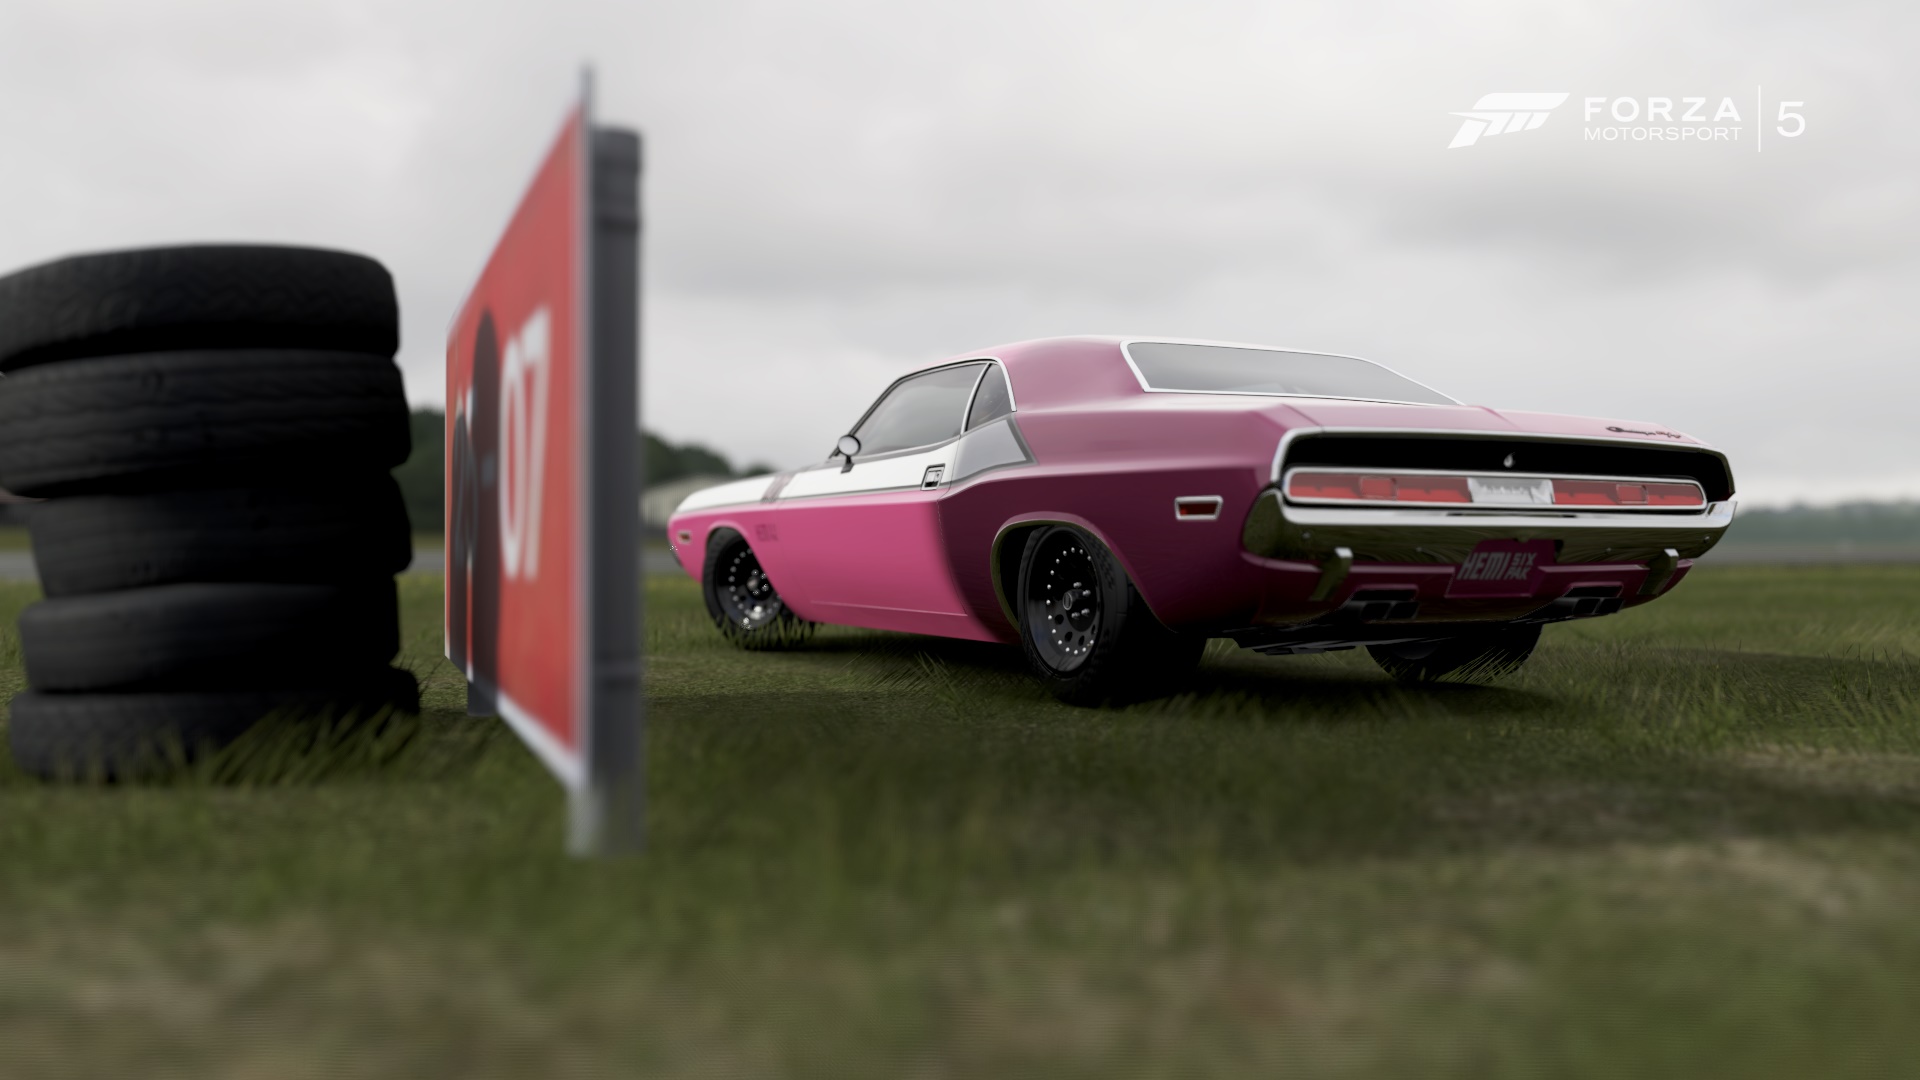 Car Muscle Cars Video Games Forza Motorsport Dodge Dodge Challenger Forza Motorsport 5 Pink Cars 1920x1080